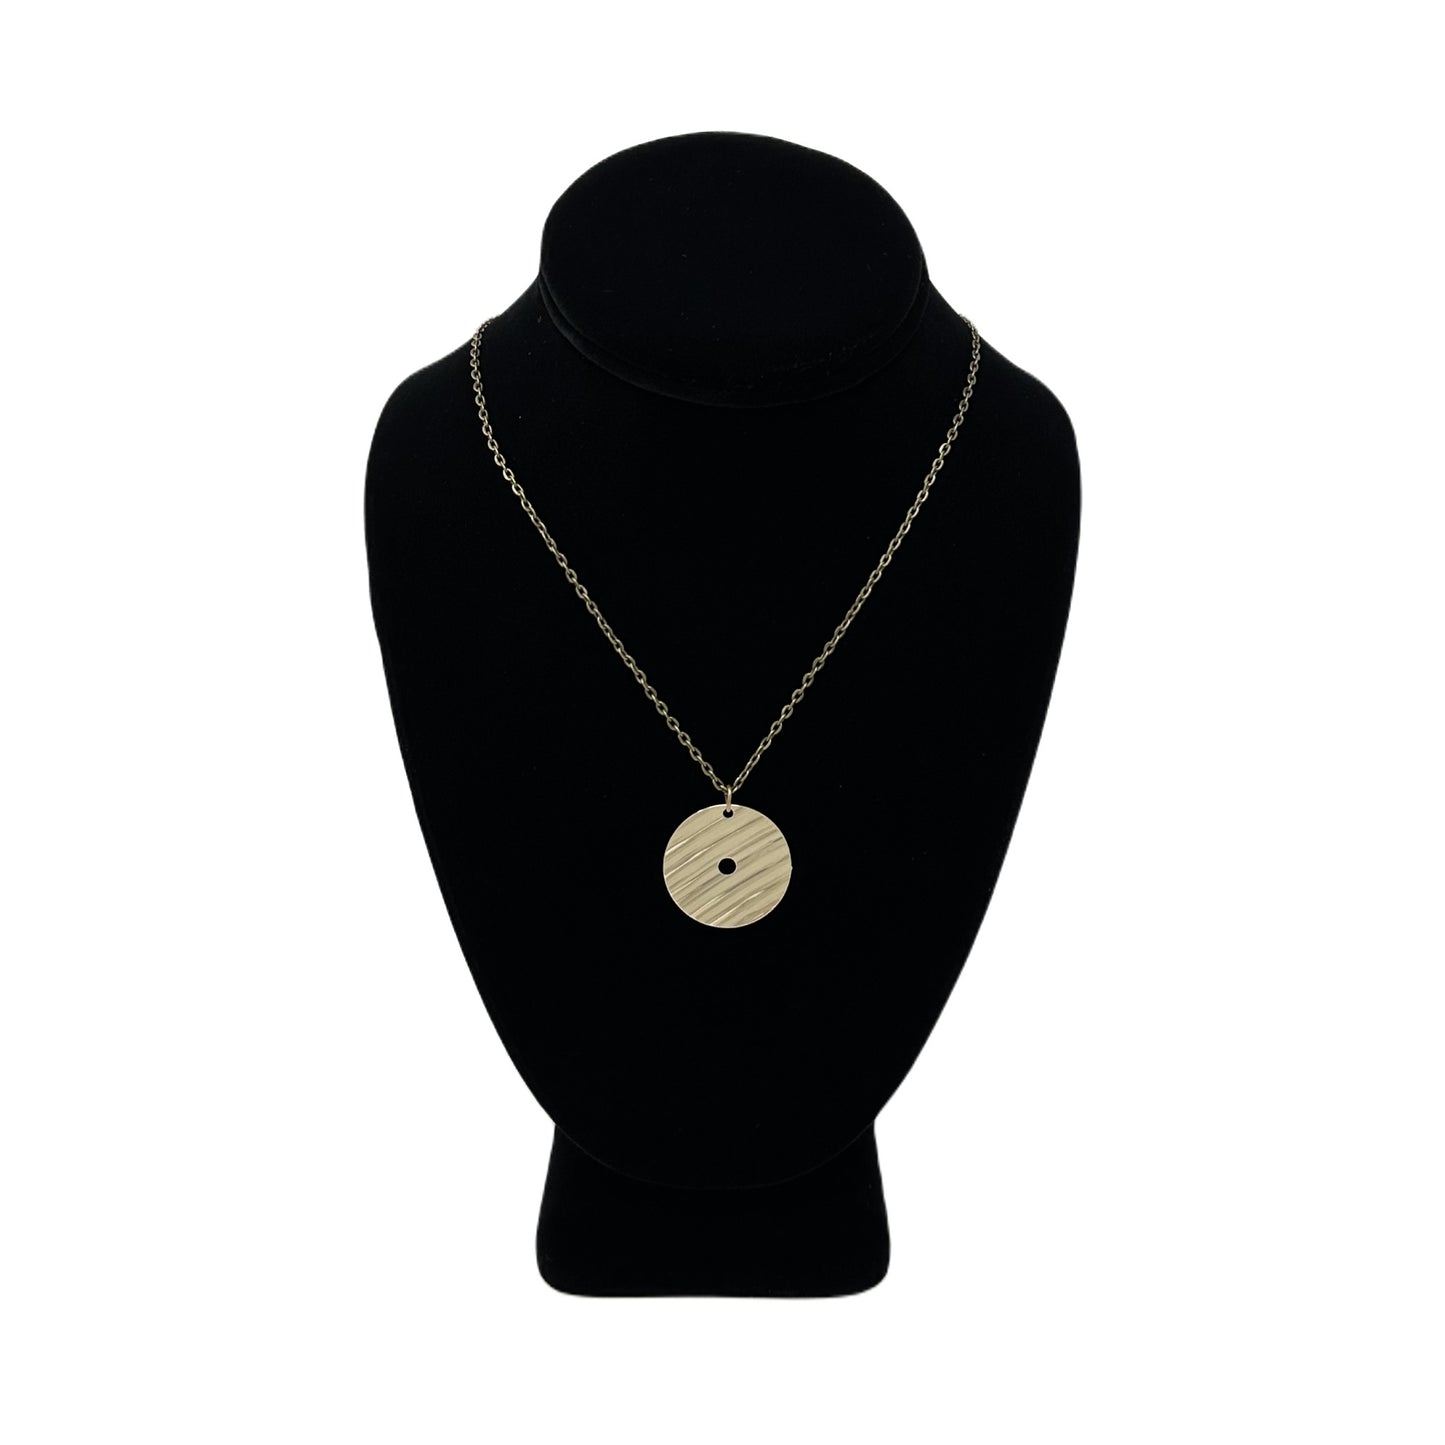 Reclaimed Cymbal Necklace, Circle